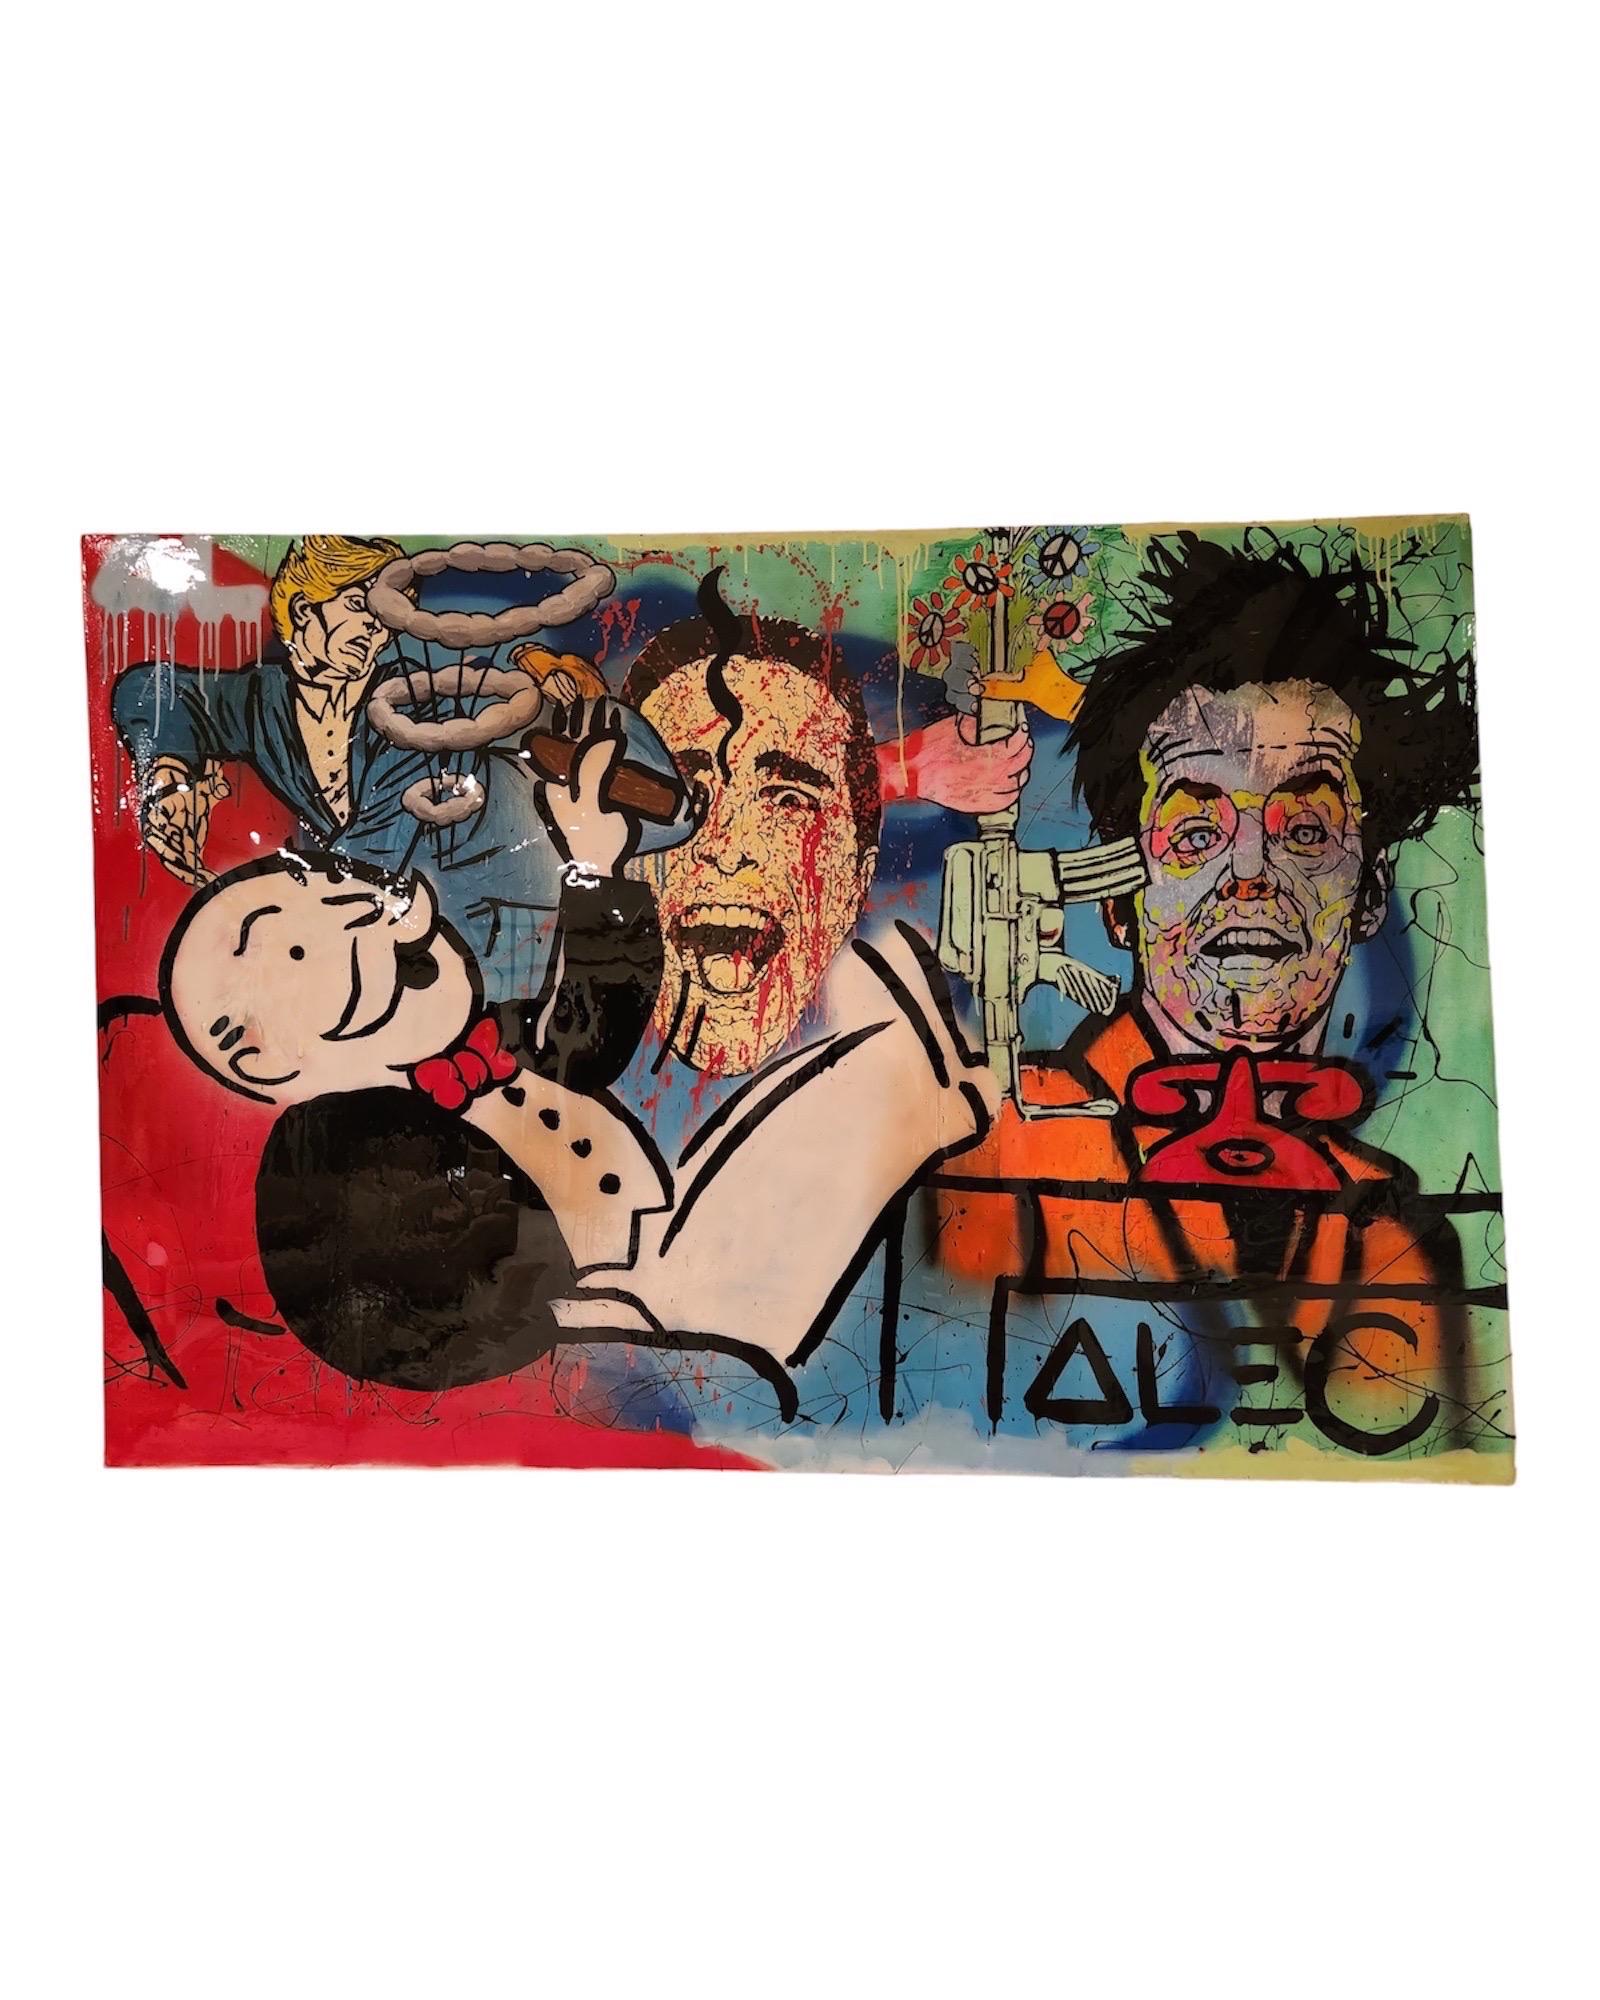 This is an original mixed-media art piece, executed in acrylic paint on stretched canvas, and finished with a glossy resin overlay. 

The piece was completed ca. 2010 by street artist Alec Monopoly (born Alec Andon) and purchased directly from the